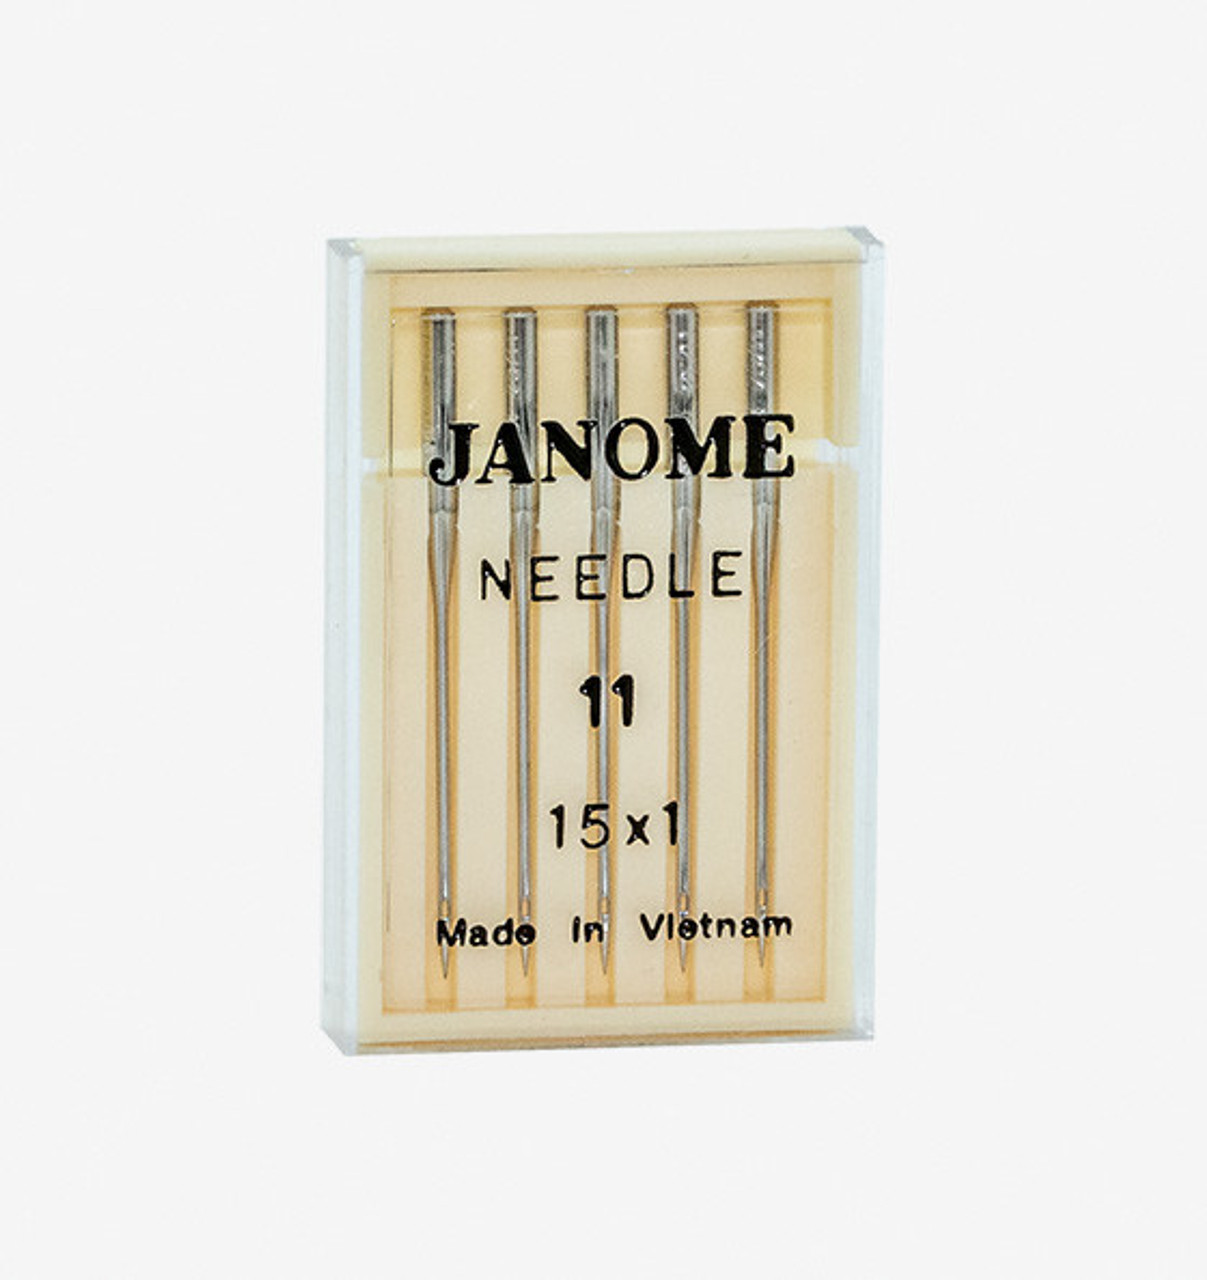 Universal Needles, Janome (5pk) #9901 : Sewing Parts Online